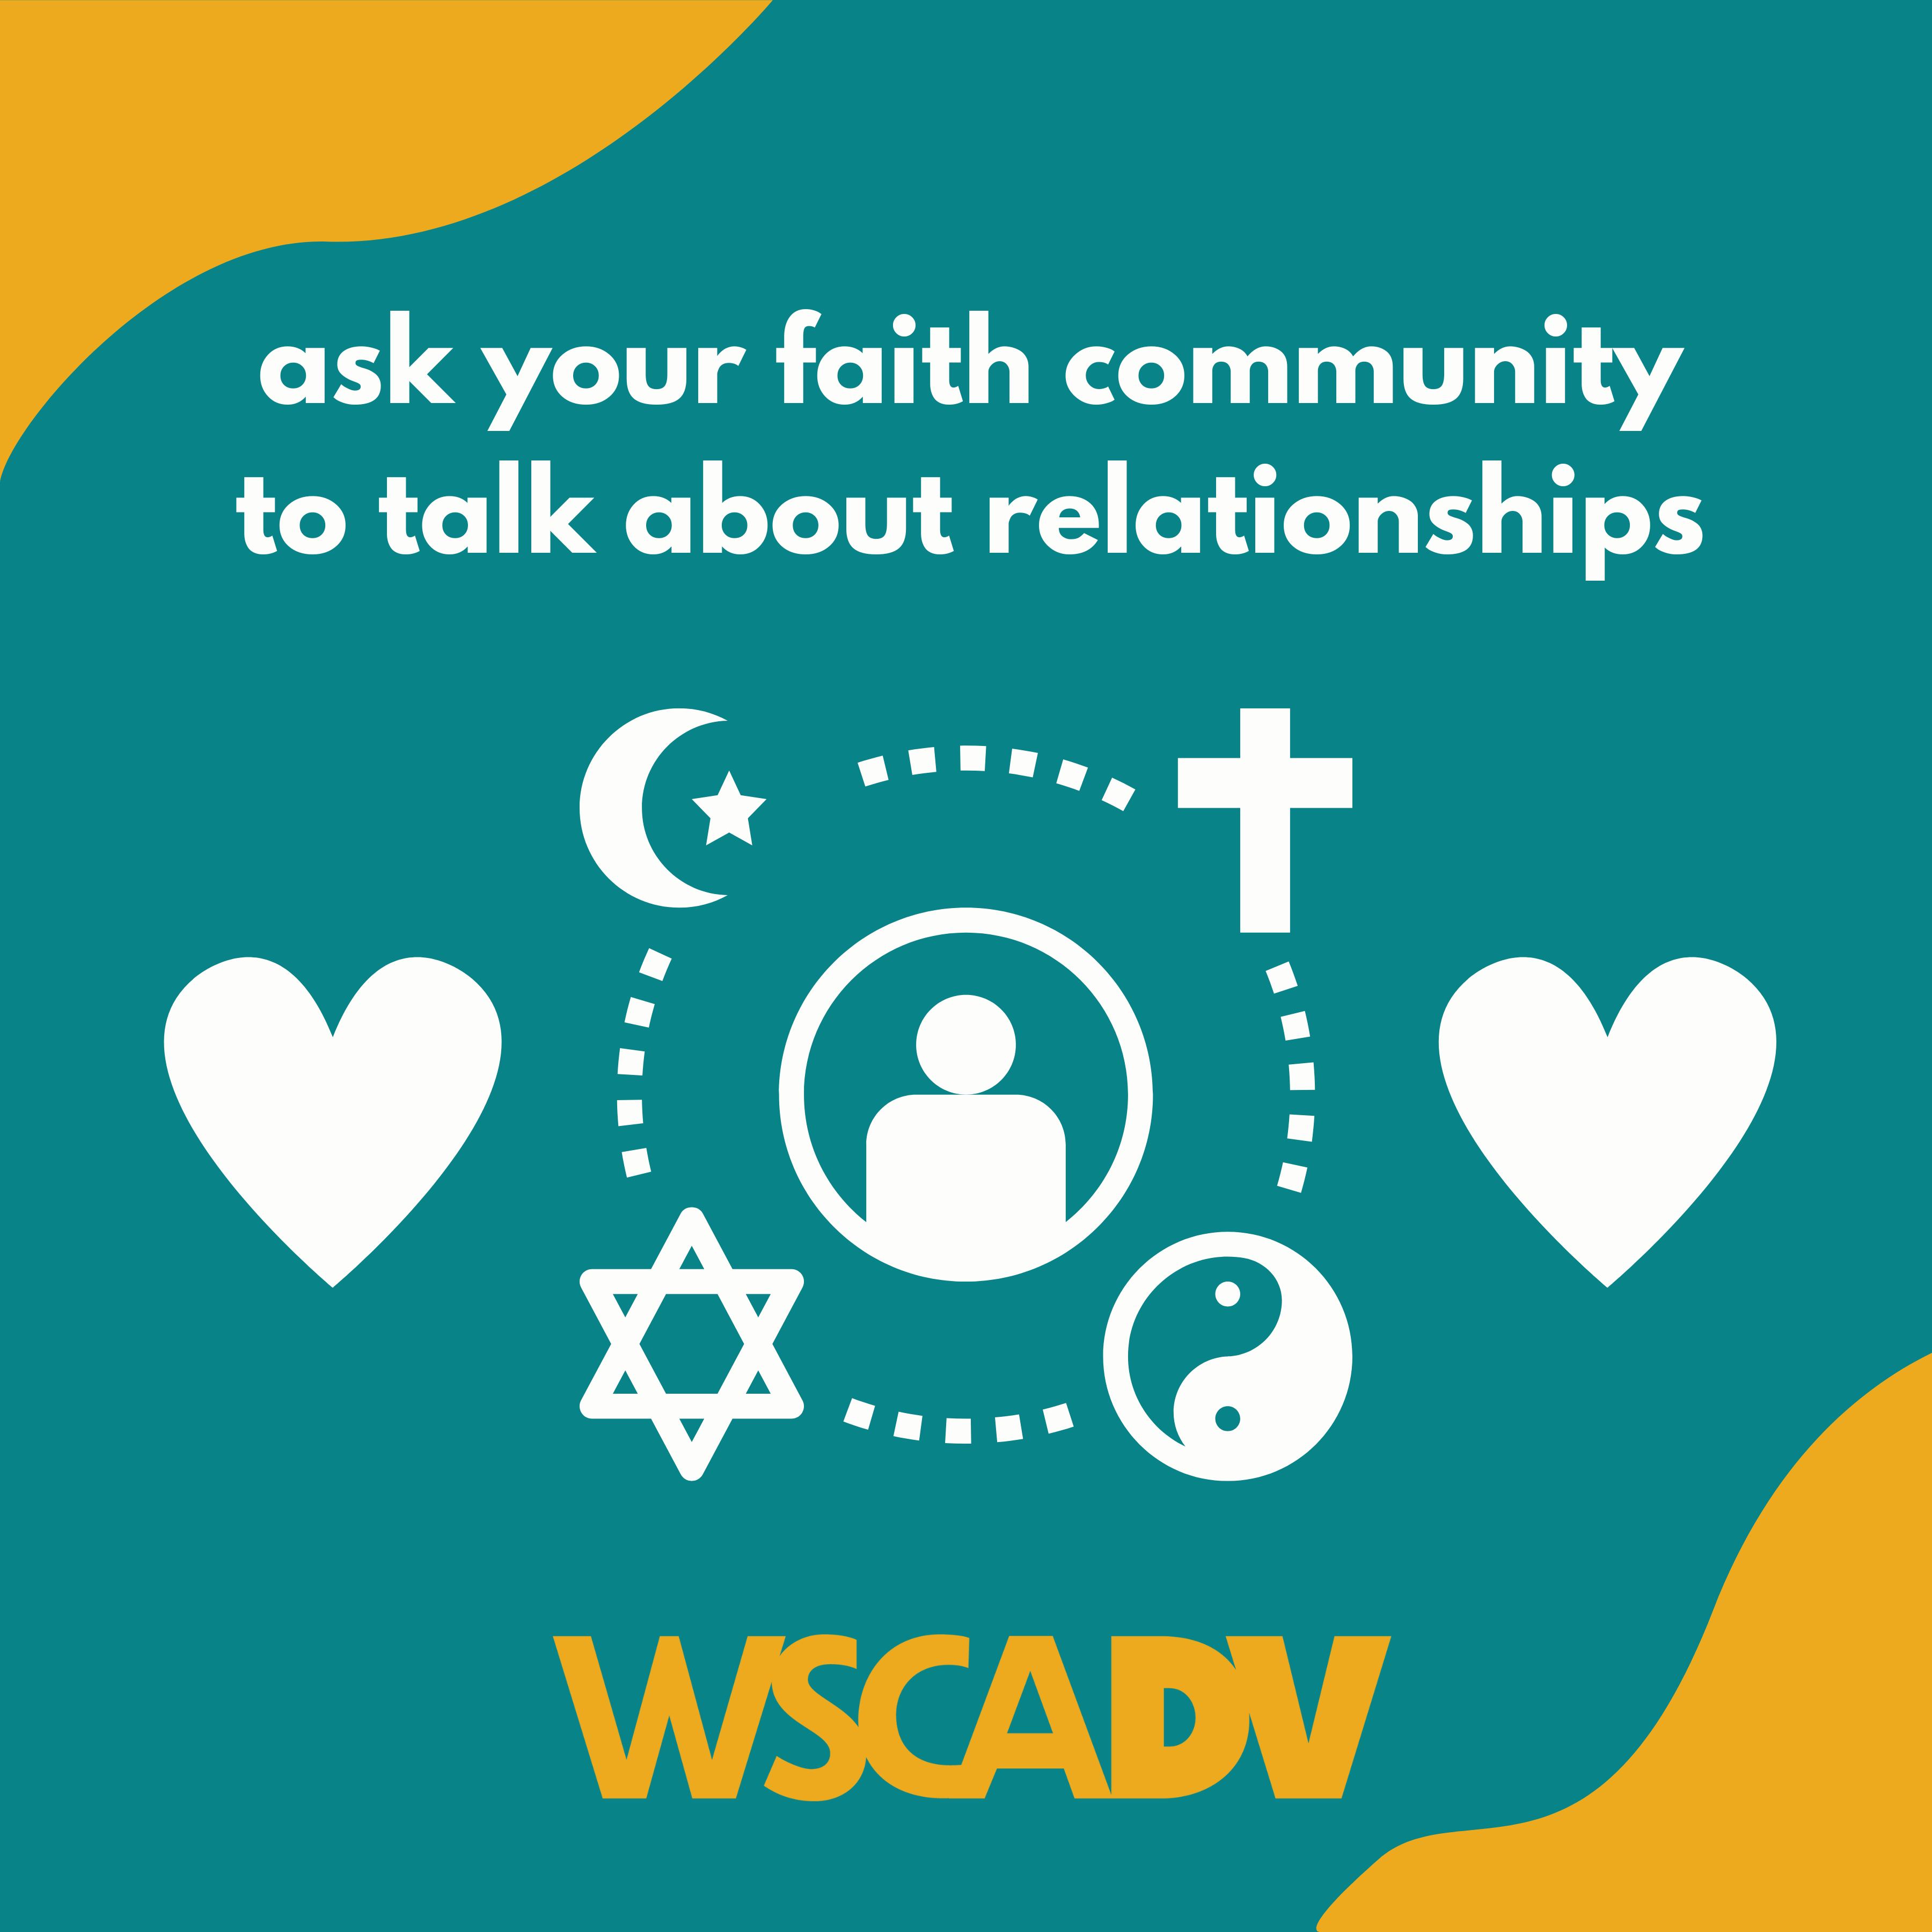 ask your faith community to talk about relationships